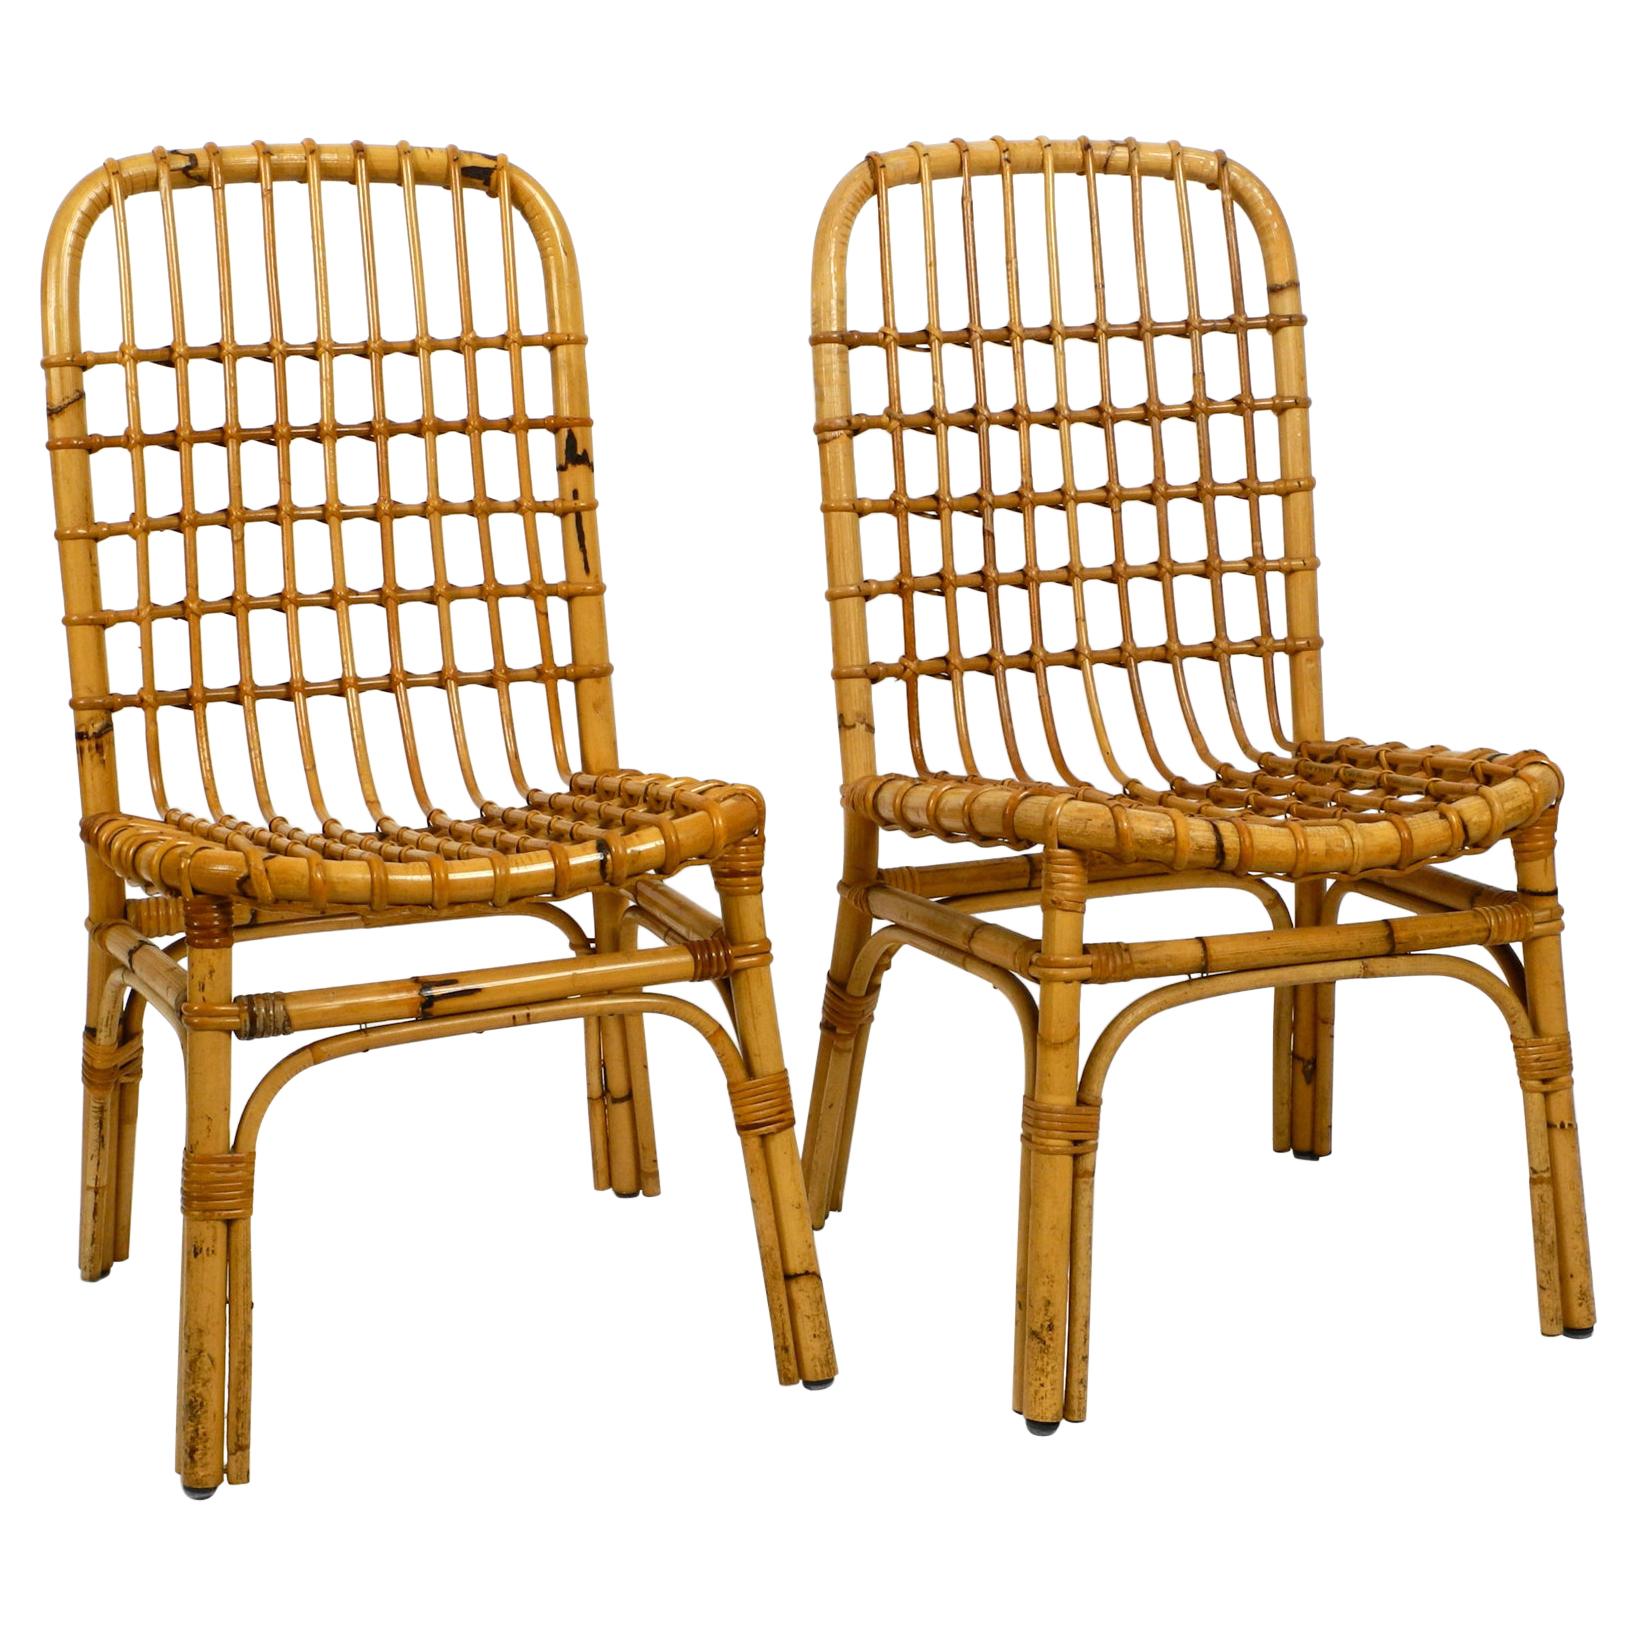 Two Large 1960s Italian Bamboo Chairs in a Very Good Vintage Condition